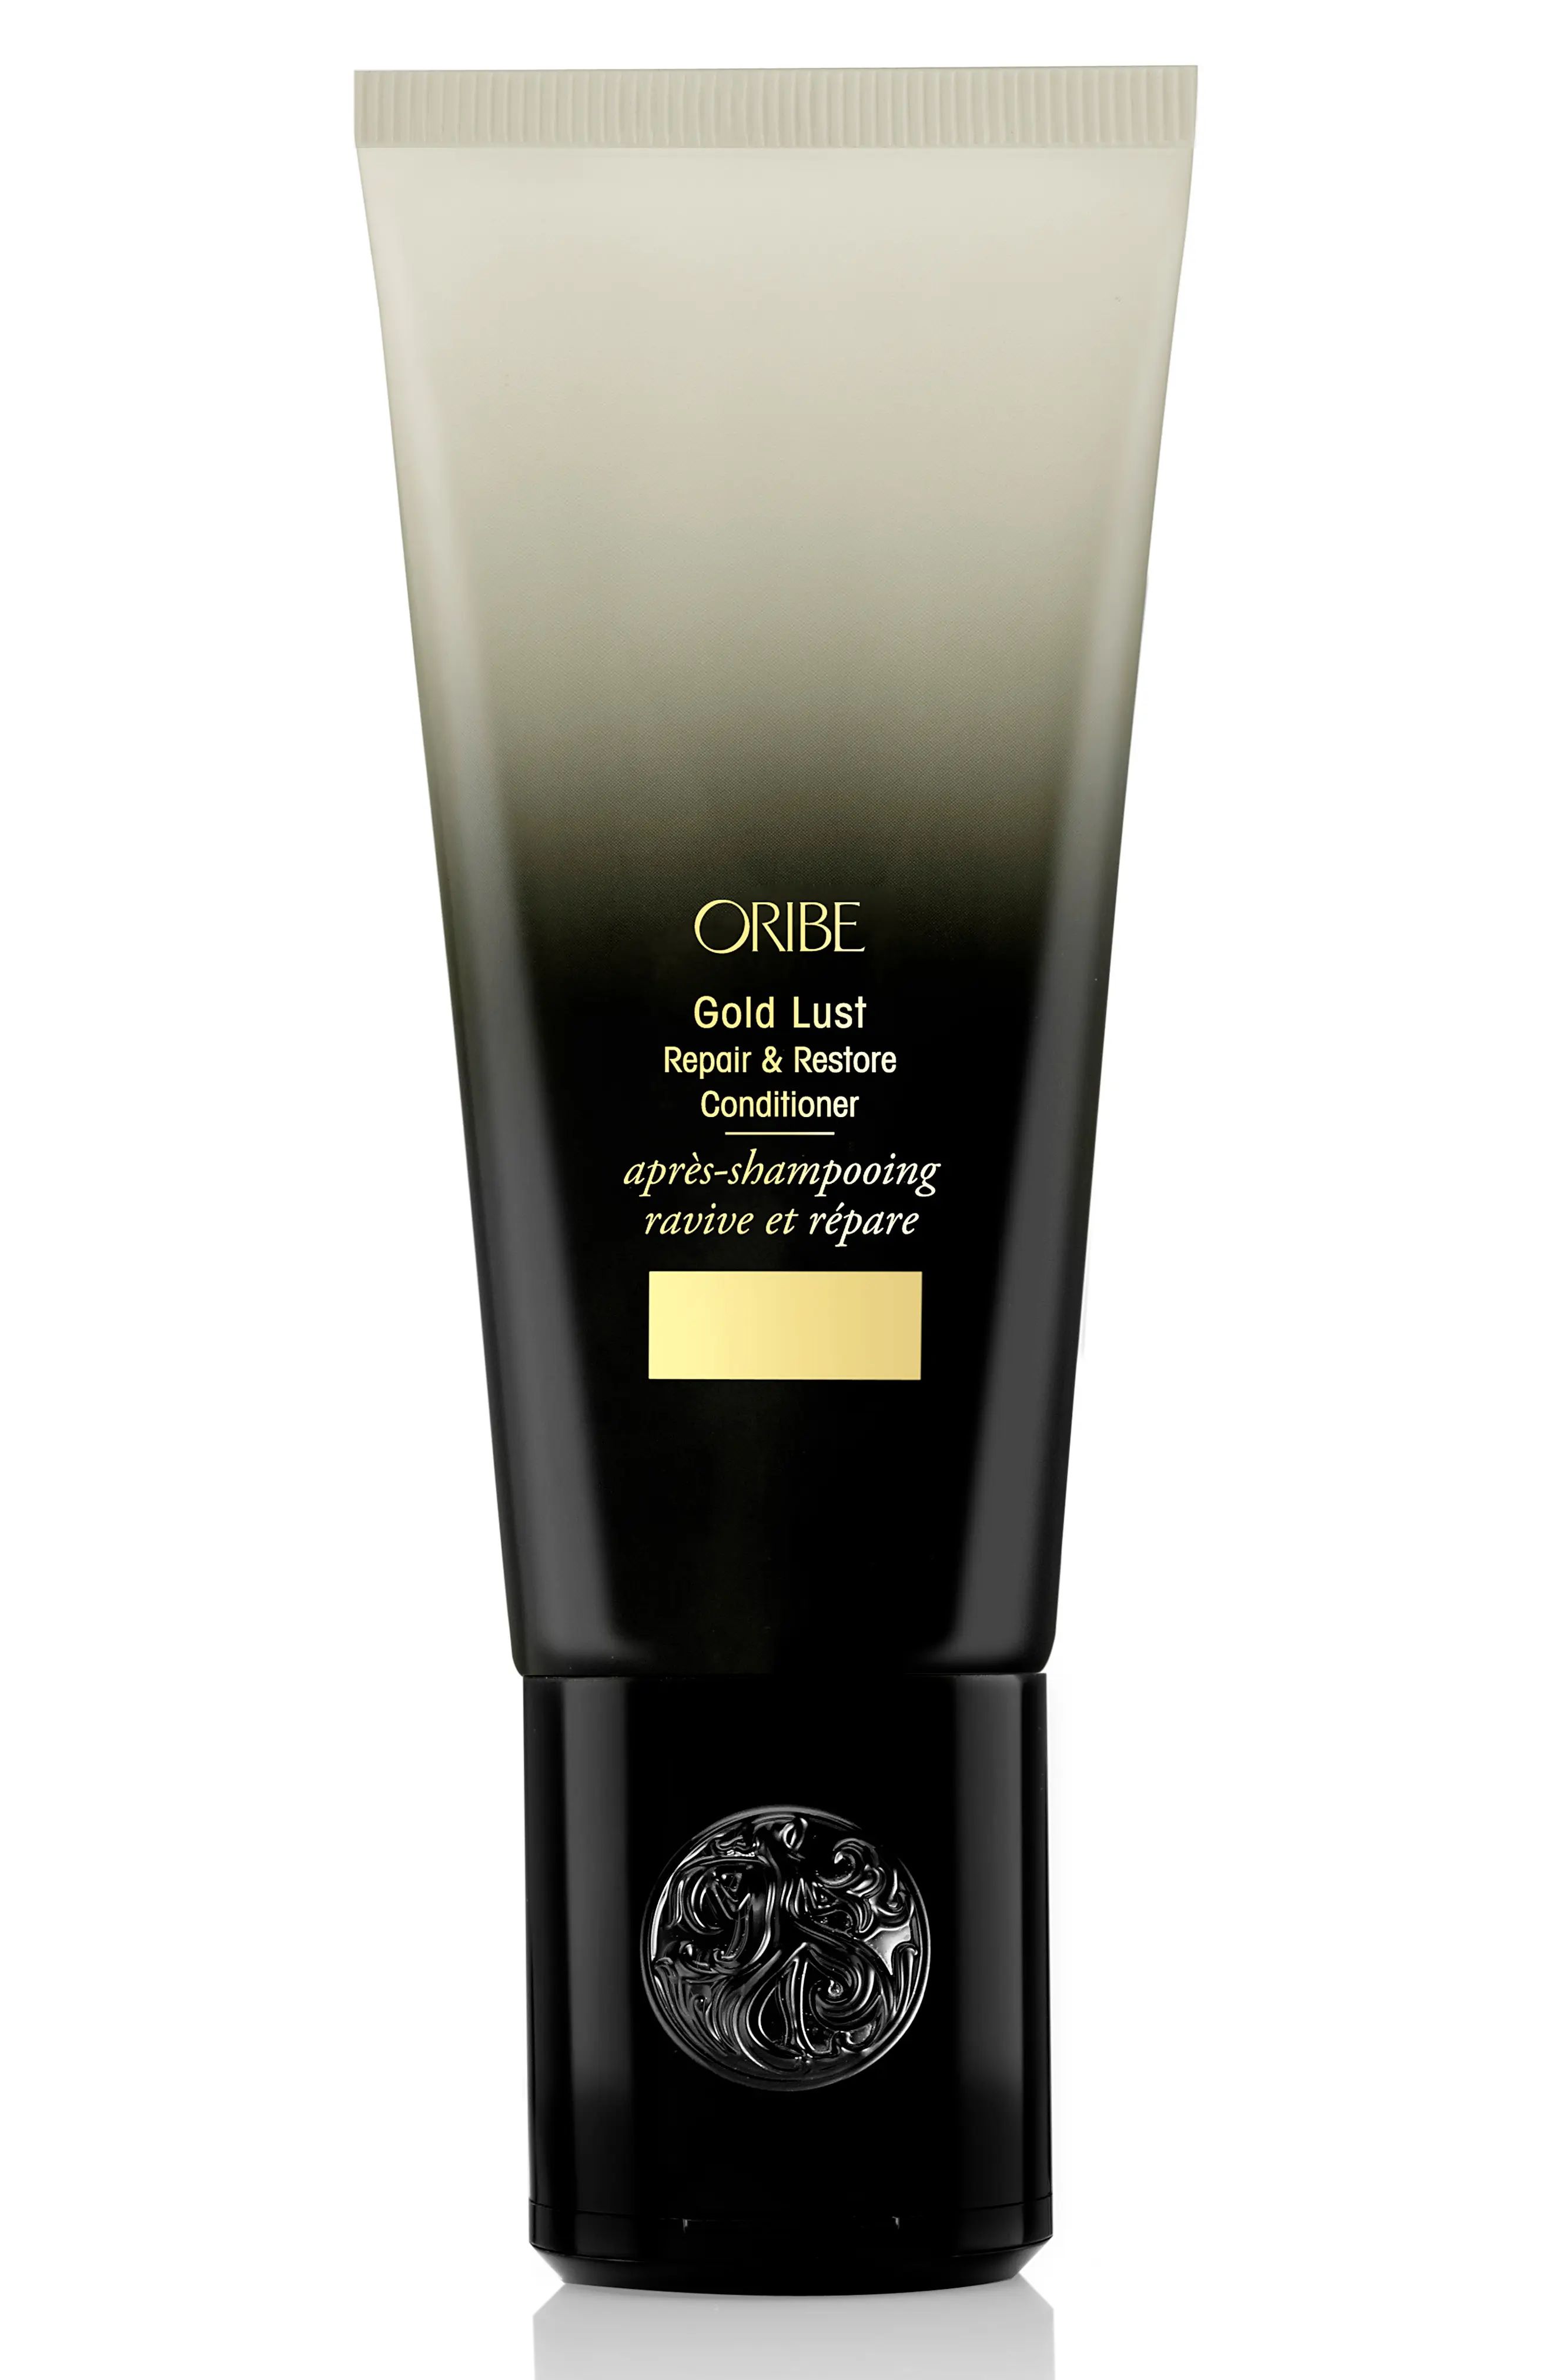 Oribe Gold Lust Repair & Restore Conditioner at Nordstrom, Size 1.7 Oz | Nordstrom